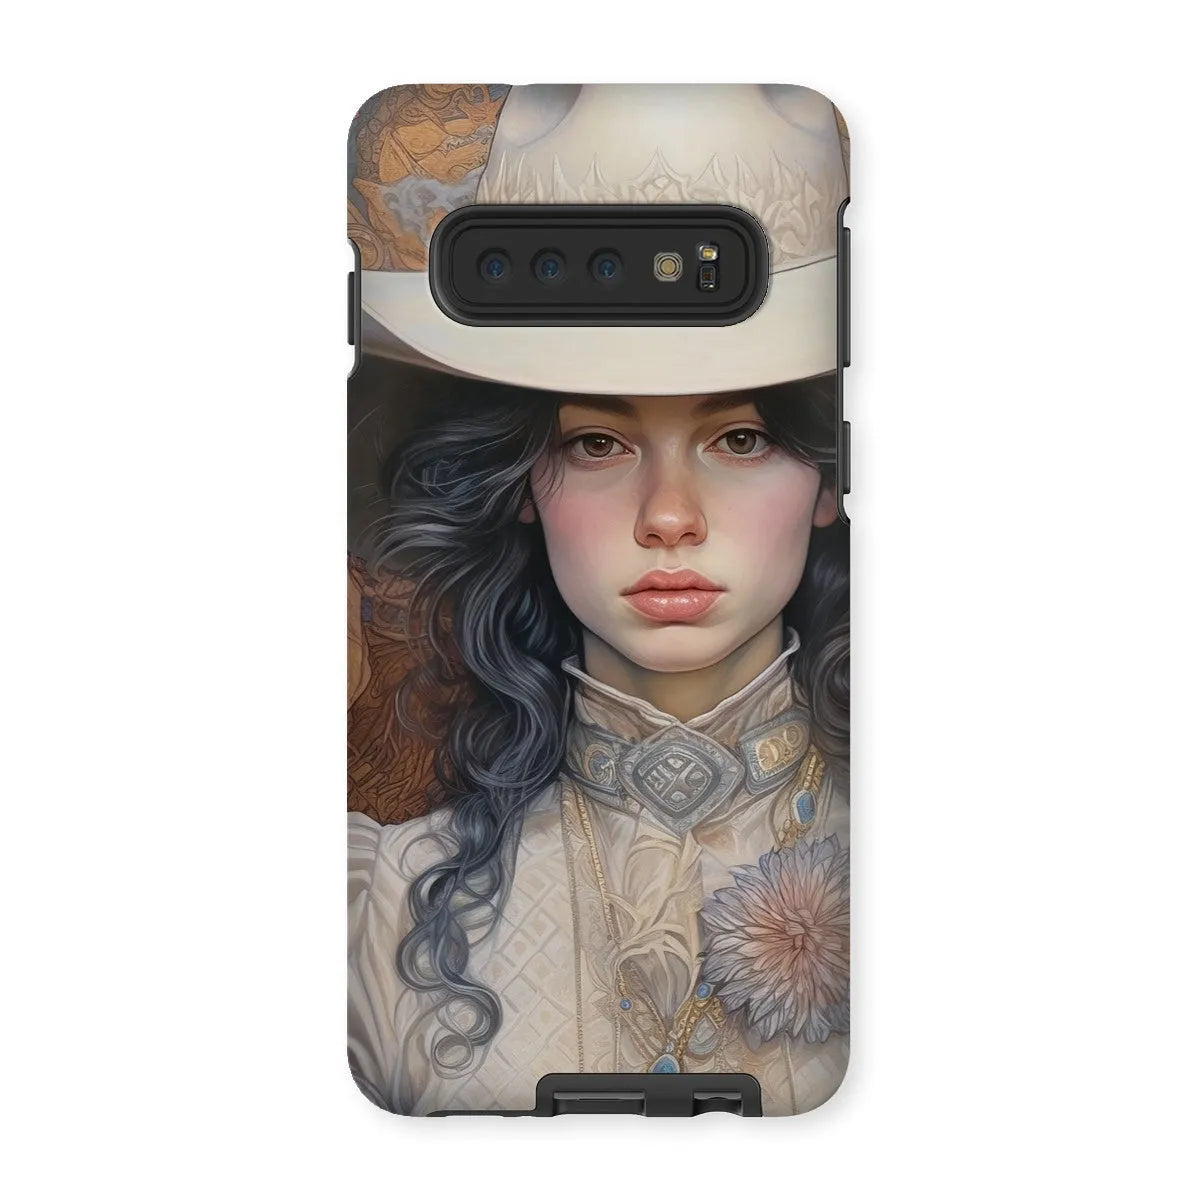 Helena The Lesbian Cowgirl - Sapphic Art Phone Case - Samsung Galaxy S10 / Matte - Mobile Phone Cases - Aesthetic Art